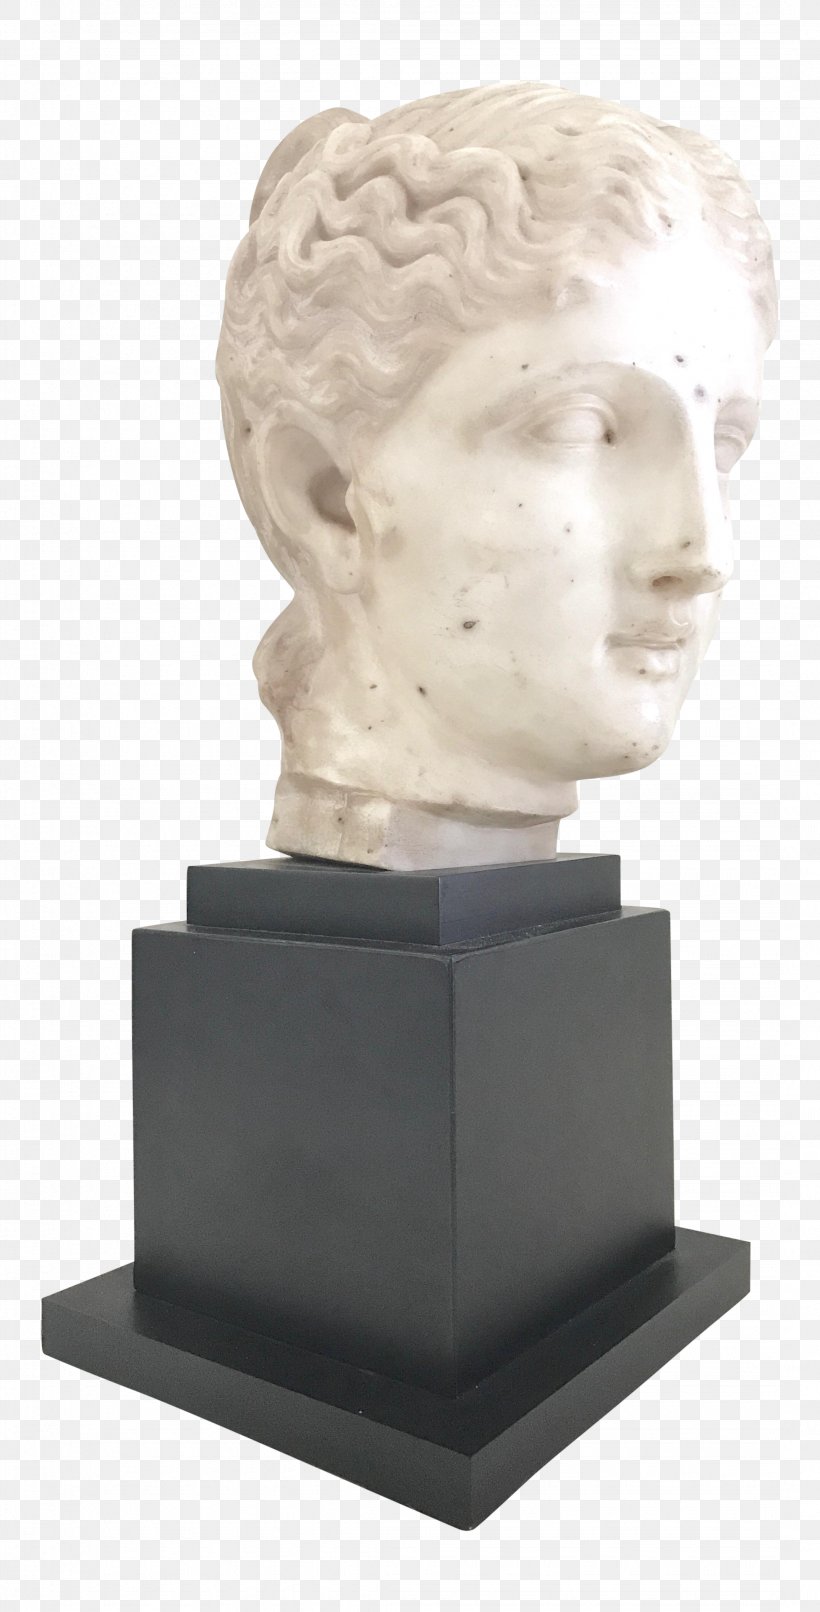 Stone Carving Classical Sculpture Rock, PNG, 2147x4222px, Stone Carving, Carving, Classical Sculpture, Head, Rock Download Free